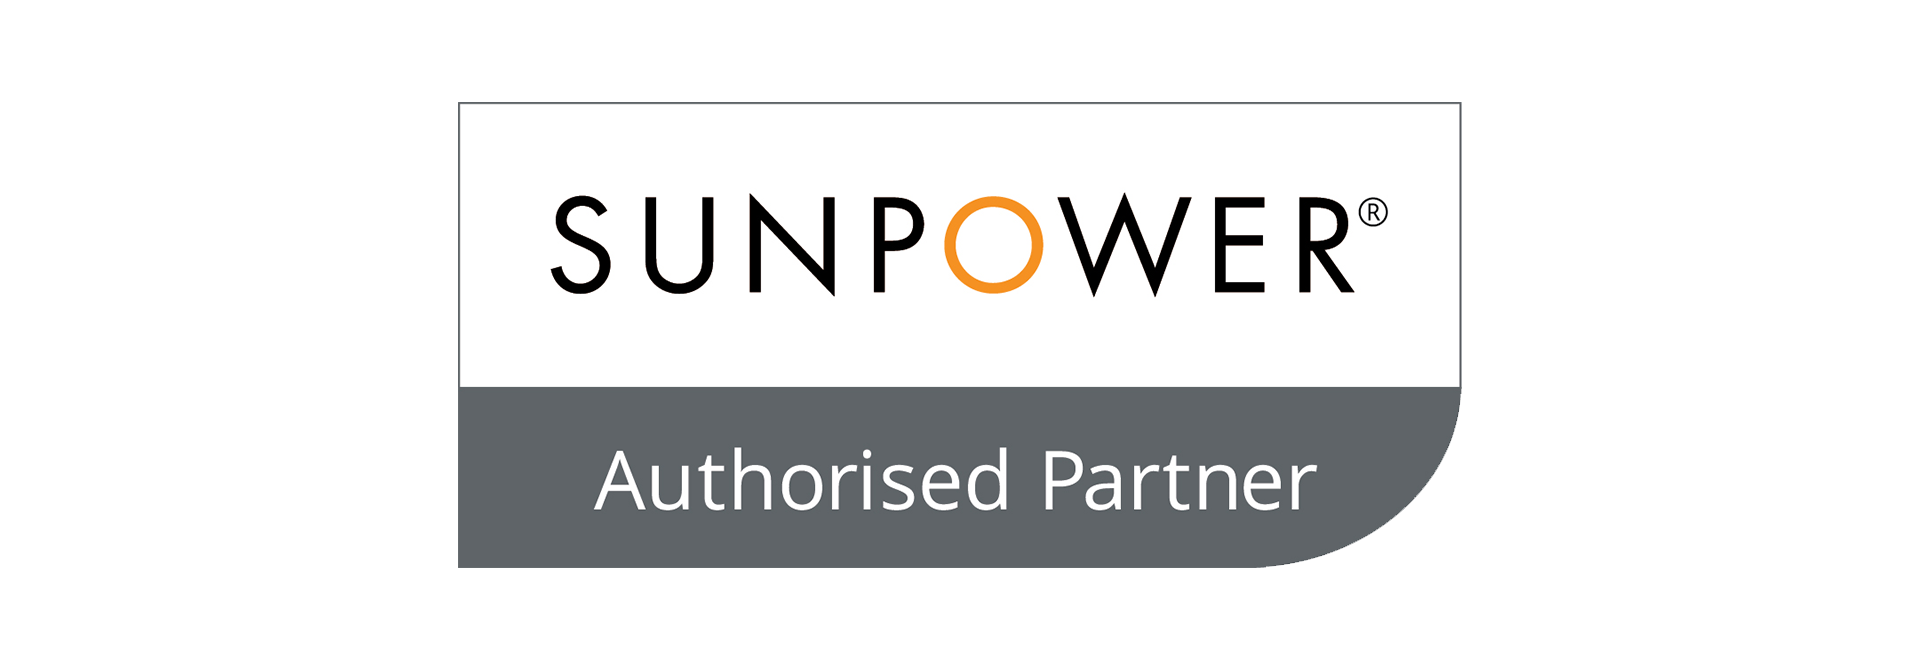 The sunpower logo is shown on a white background.